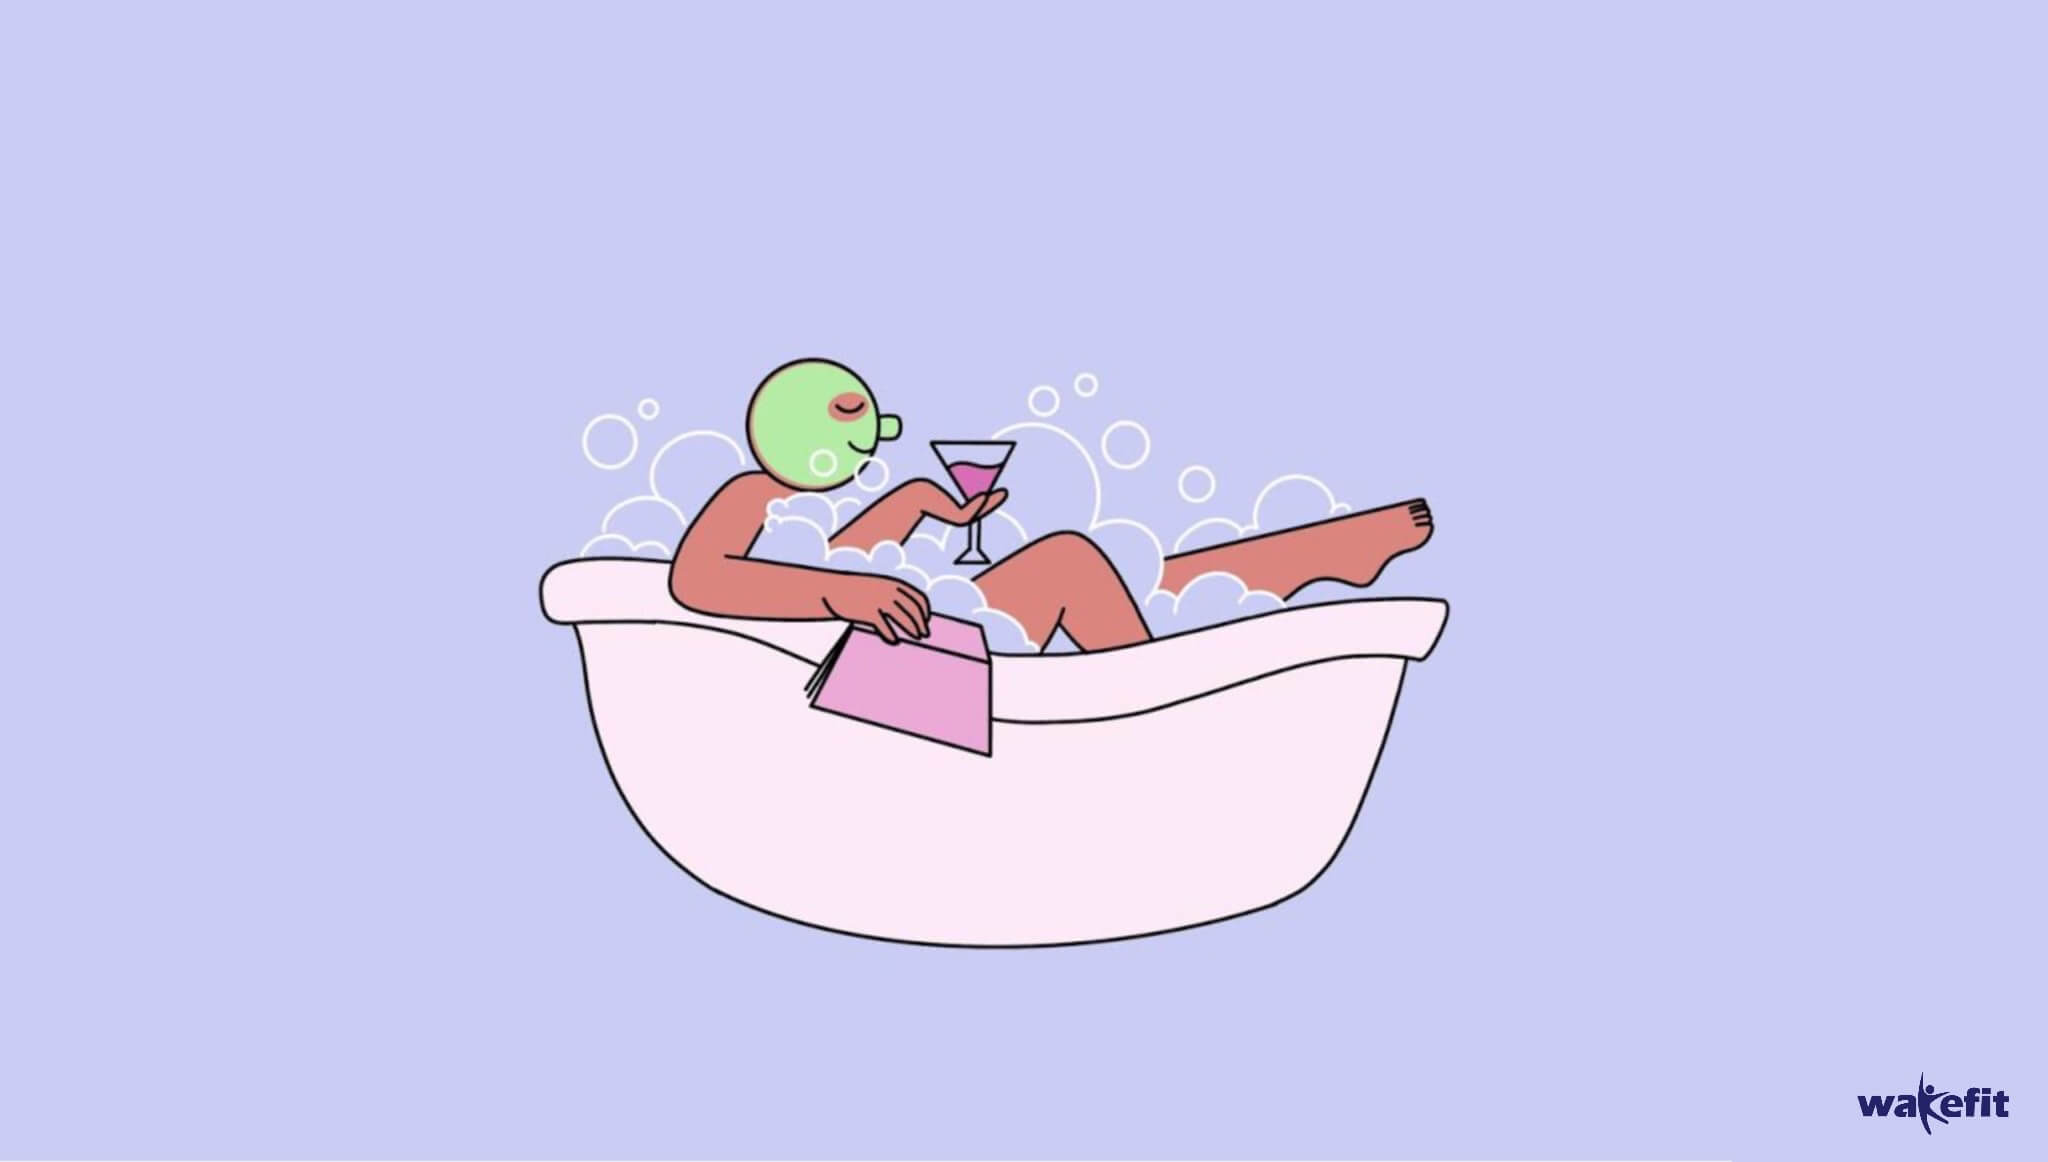 https://www.wakefit.co/blog/wp-content/uploads/2020/04/Make-Your-Own-Bath-Salts-This-Earth-Day.jpg